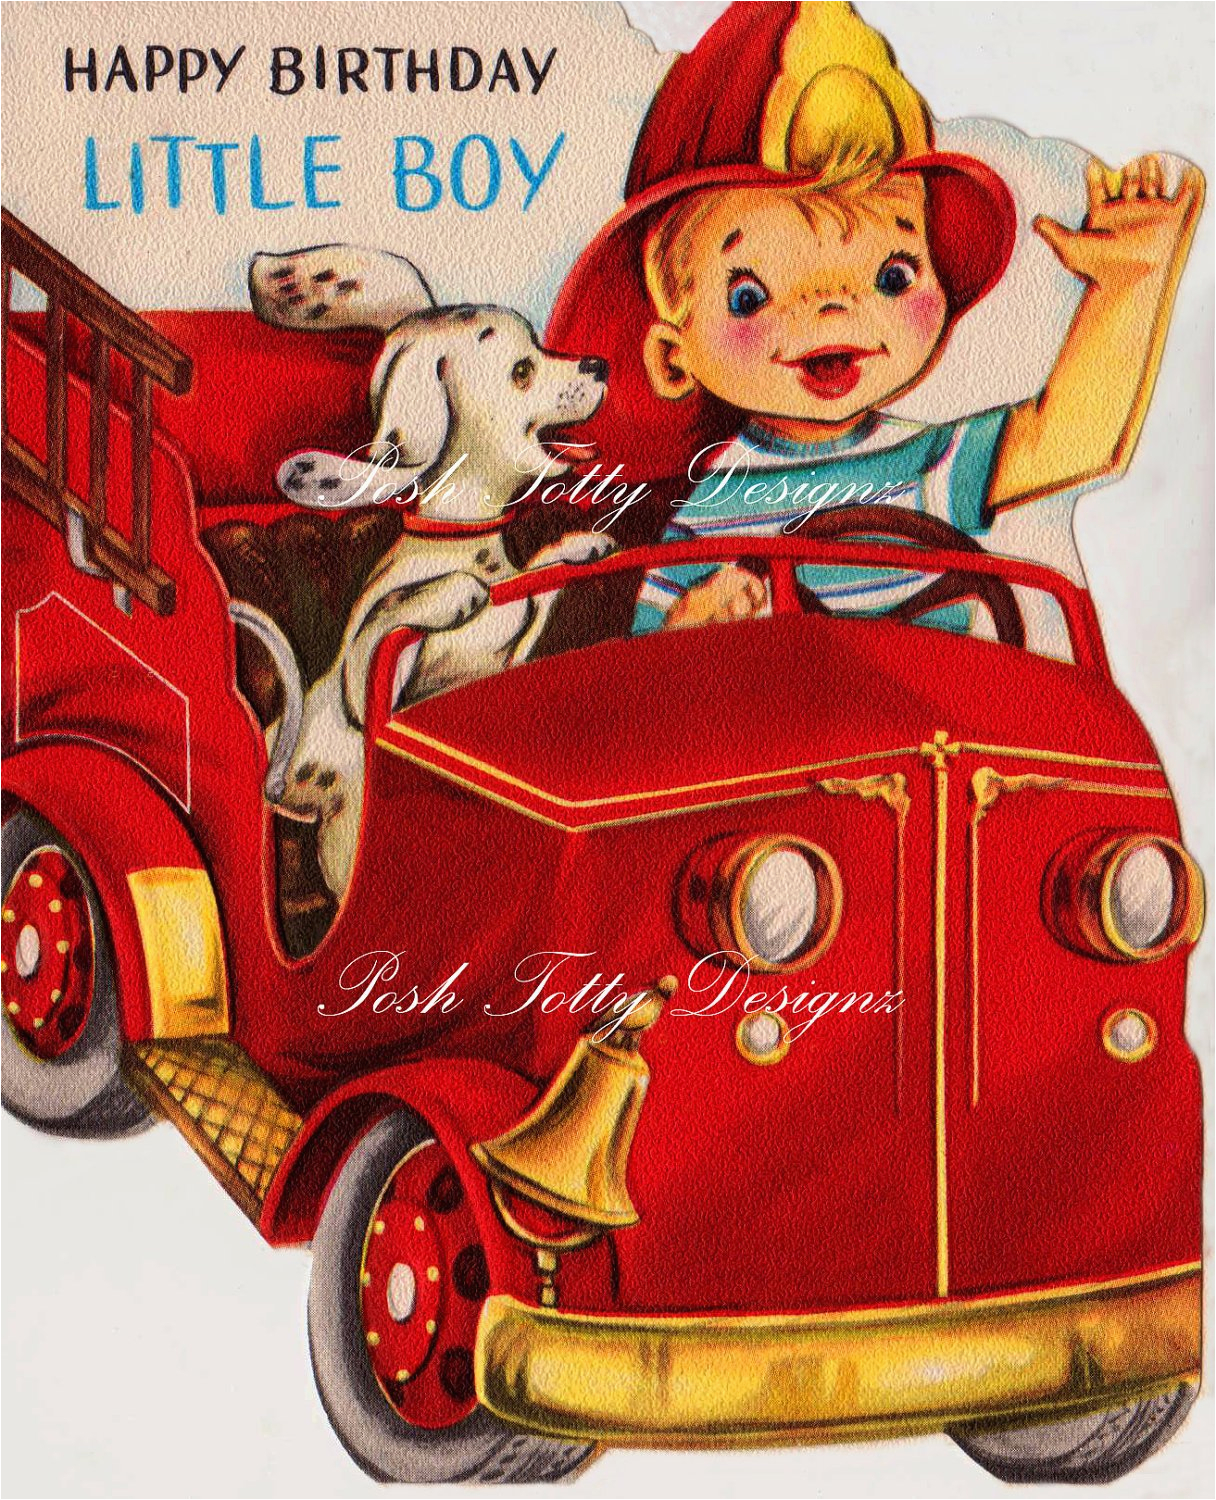 1950s happy birthday little boy fire chief vintage greetings